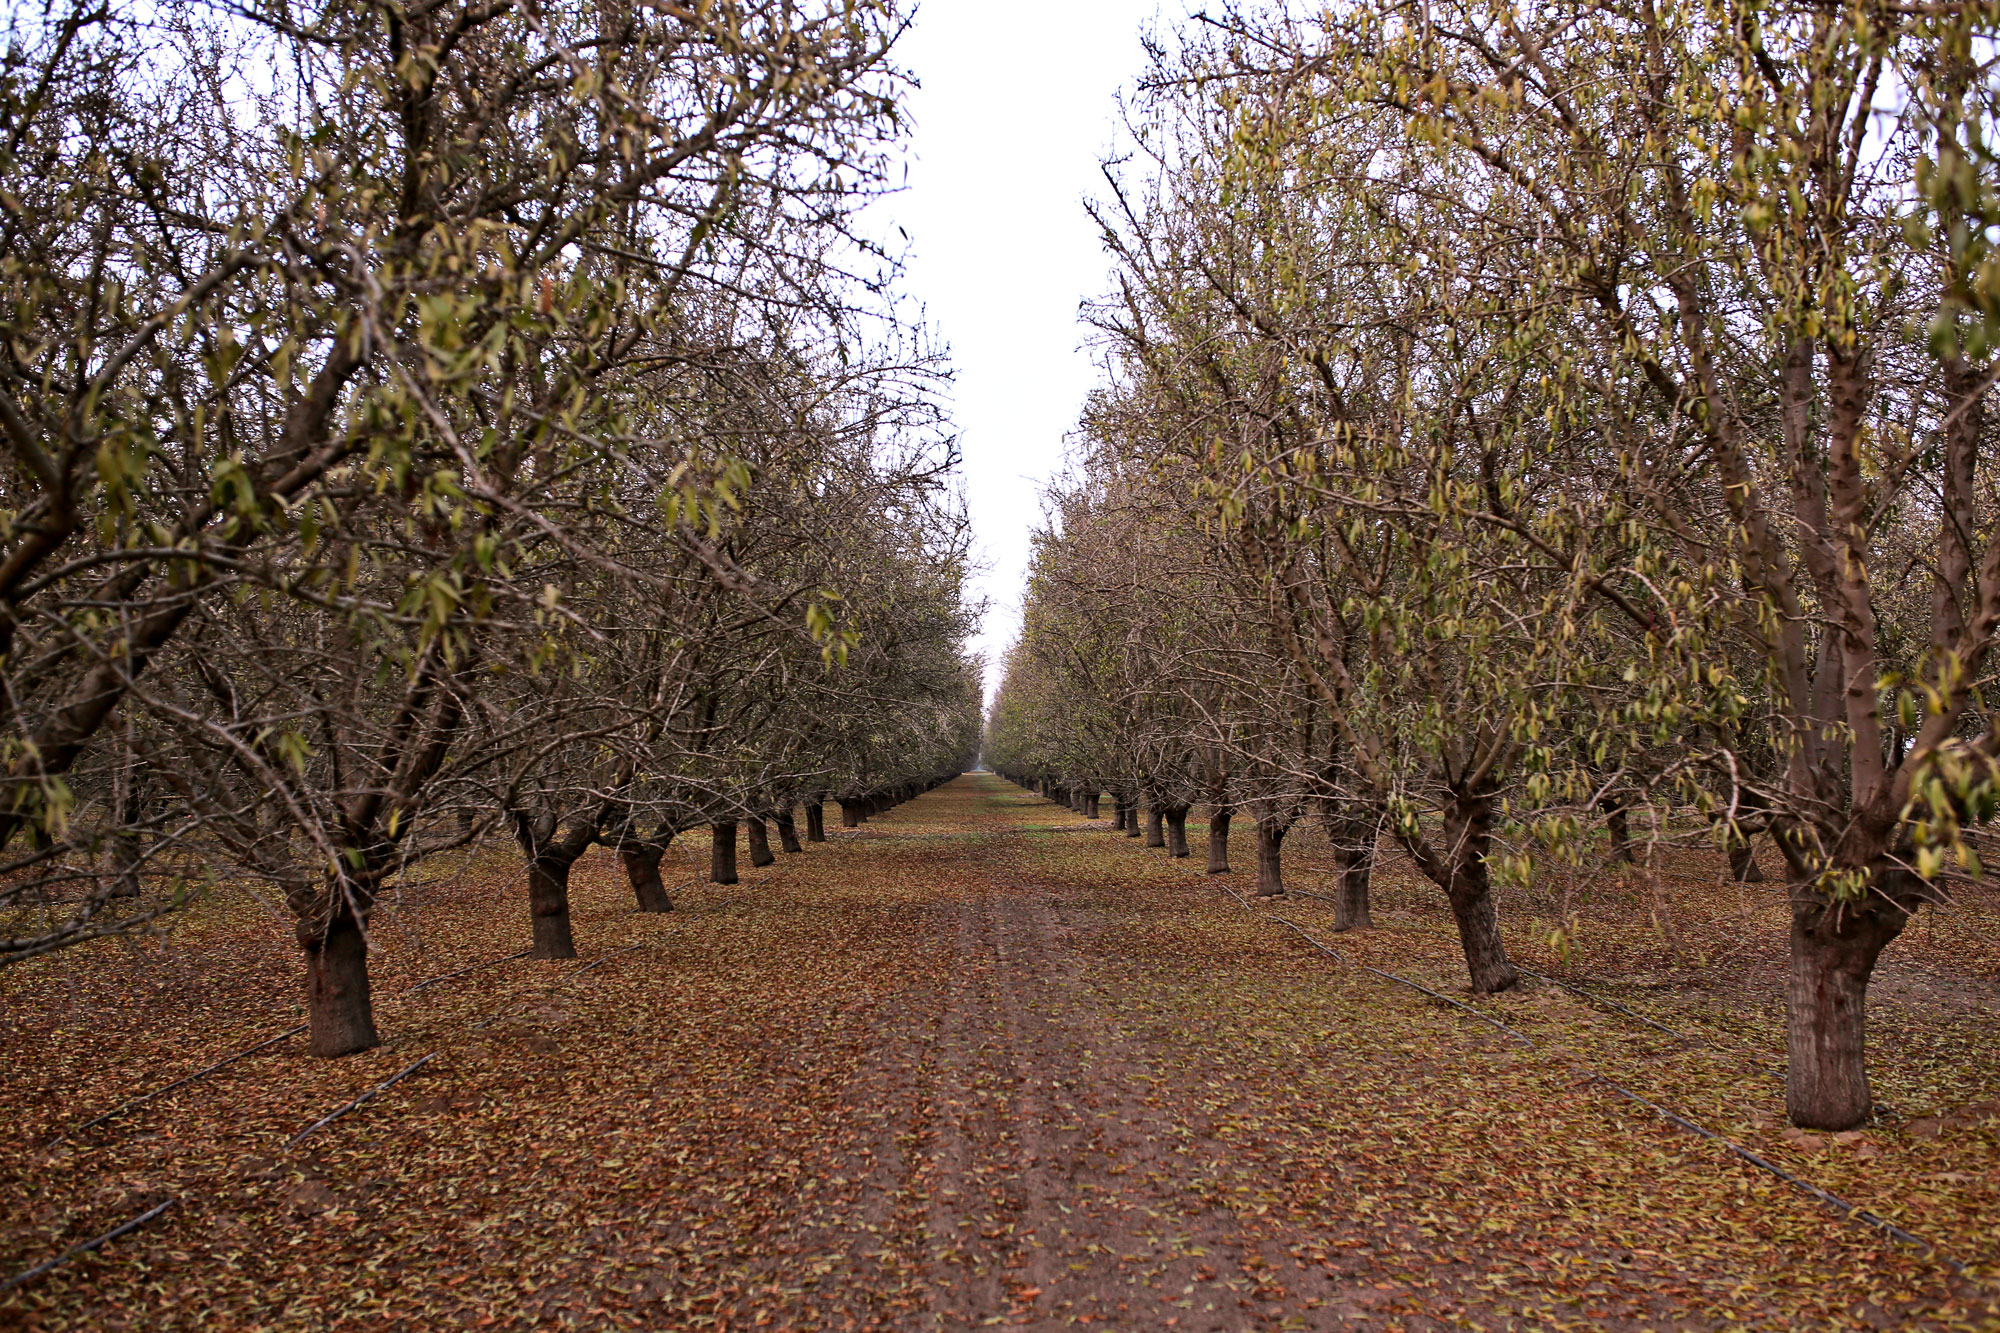 Photograph of orchard